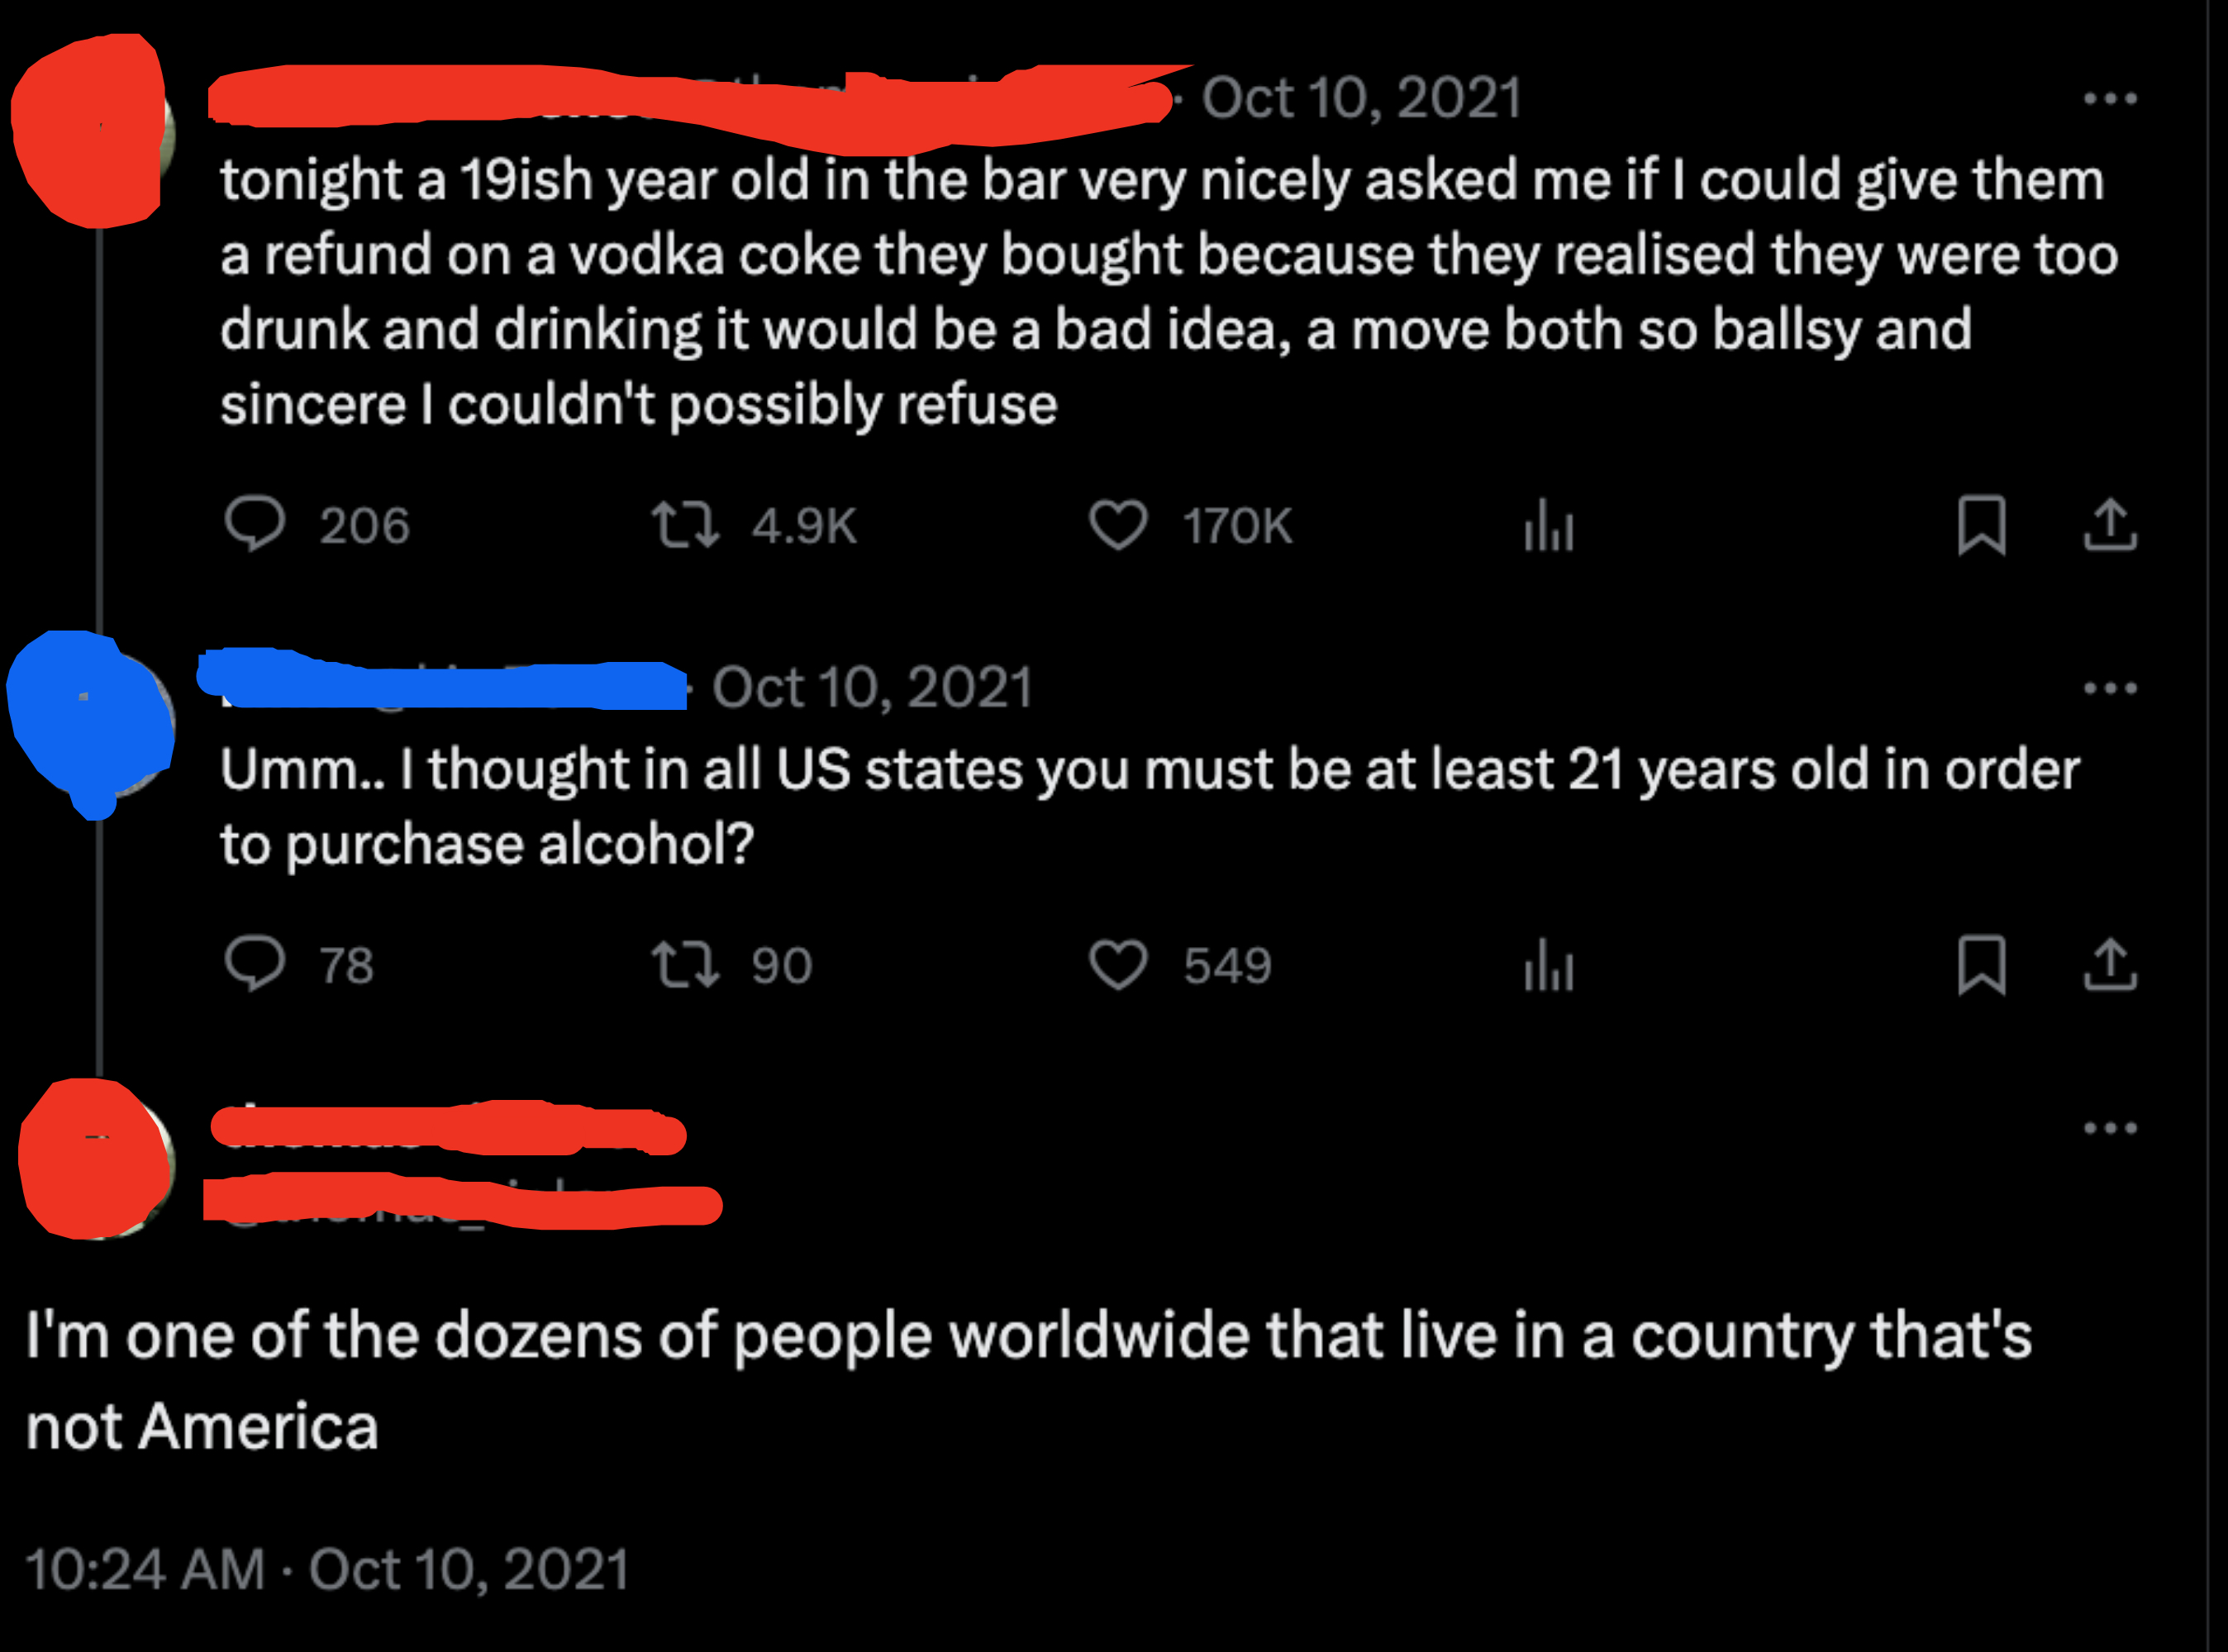 i thought in all U.S states you must be at least 21 years old in order to purchase alcohol, and a person replies, i&#x27;m one of the dozens of people worldwide that live in a country that&#x27;s not america